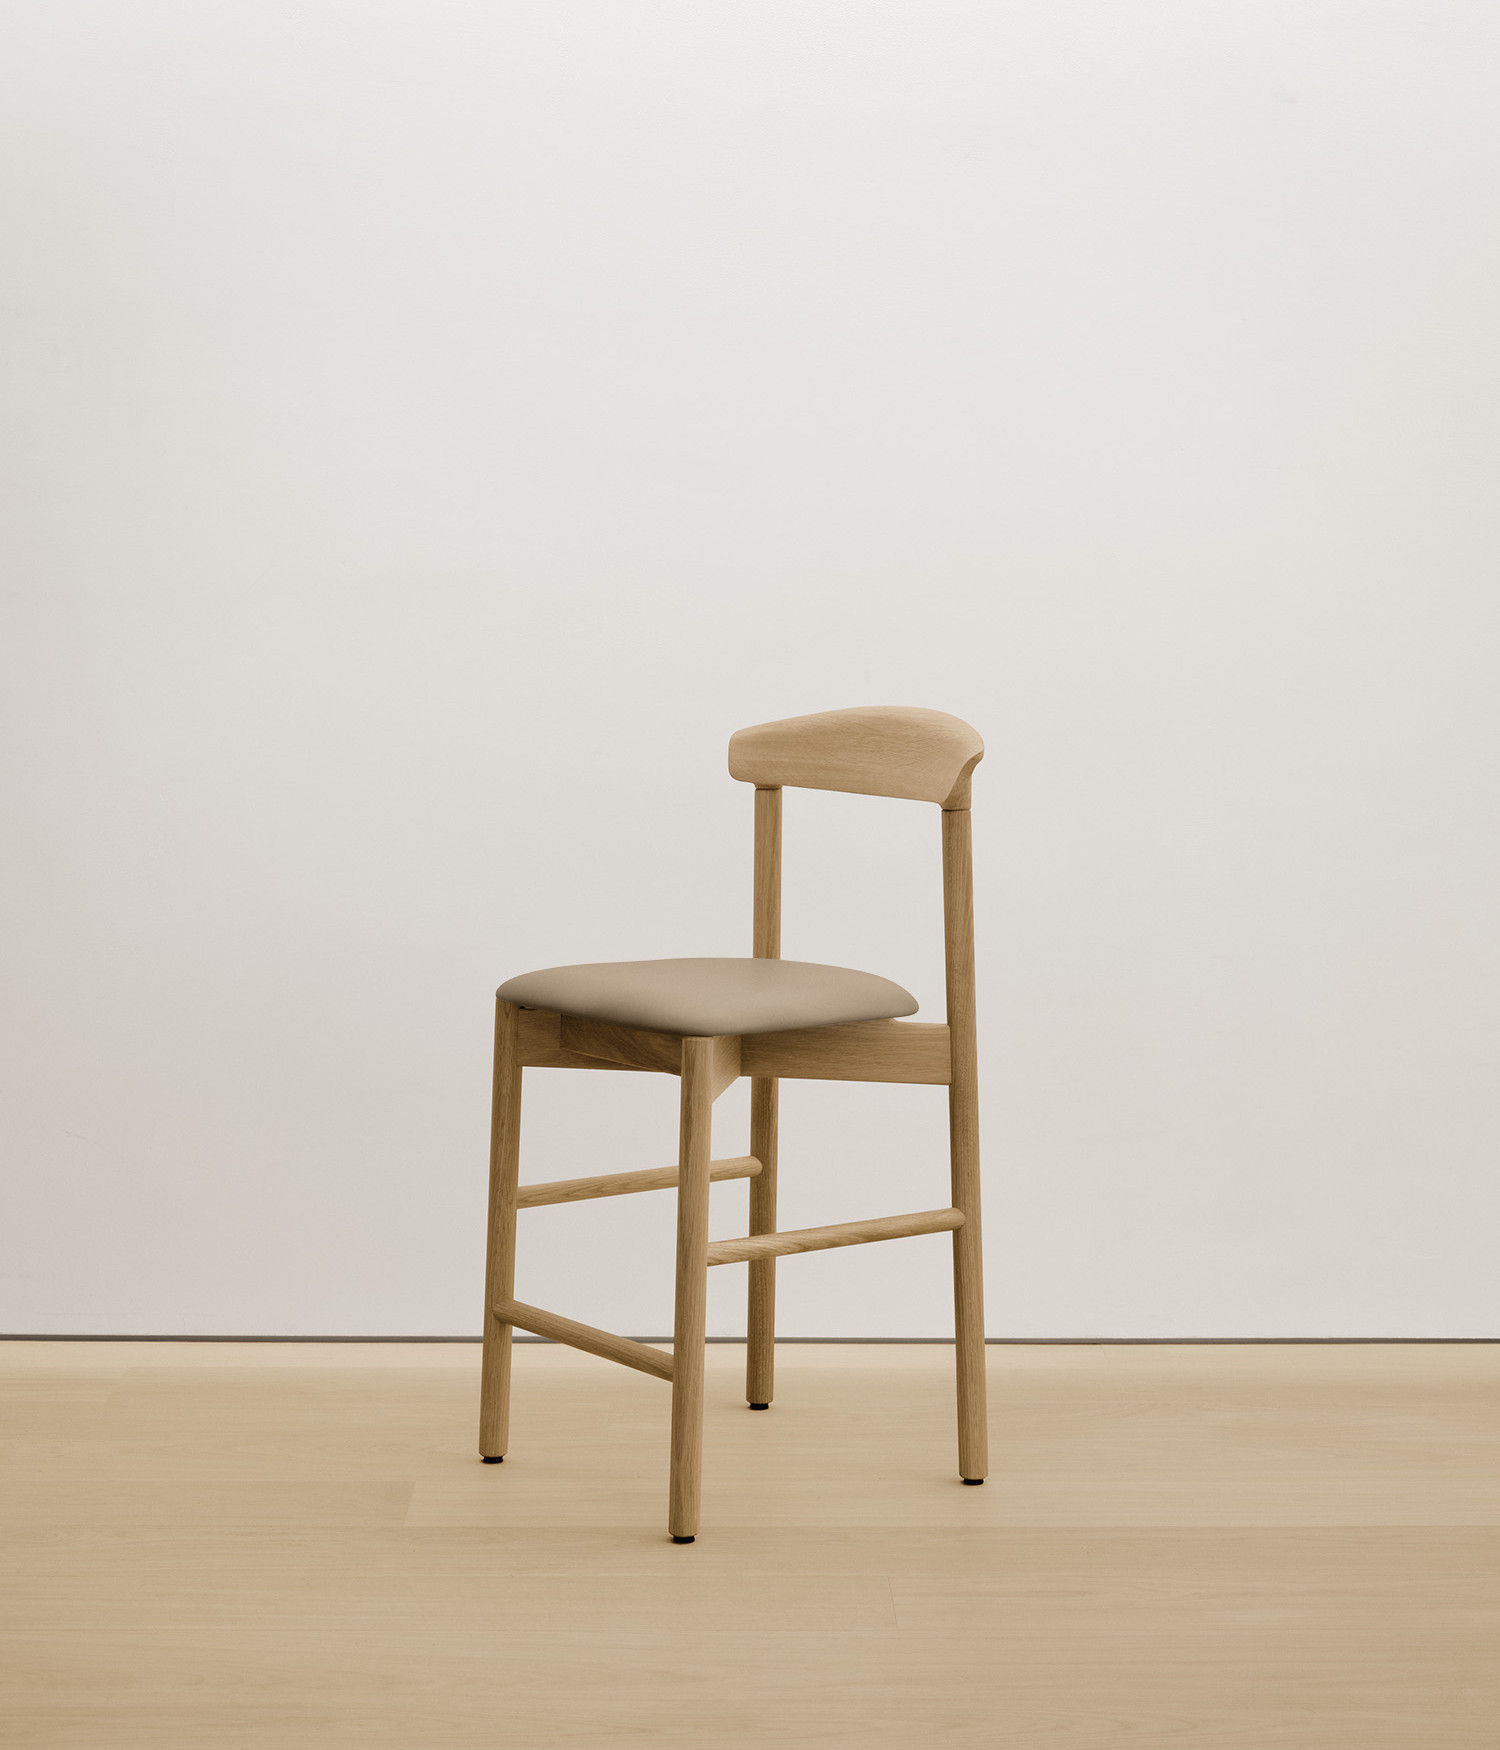  white-oak stool with cream color upholstered seat 